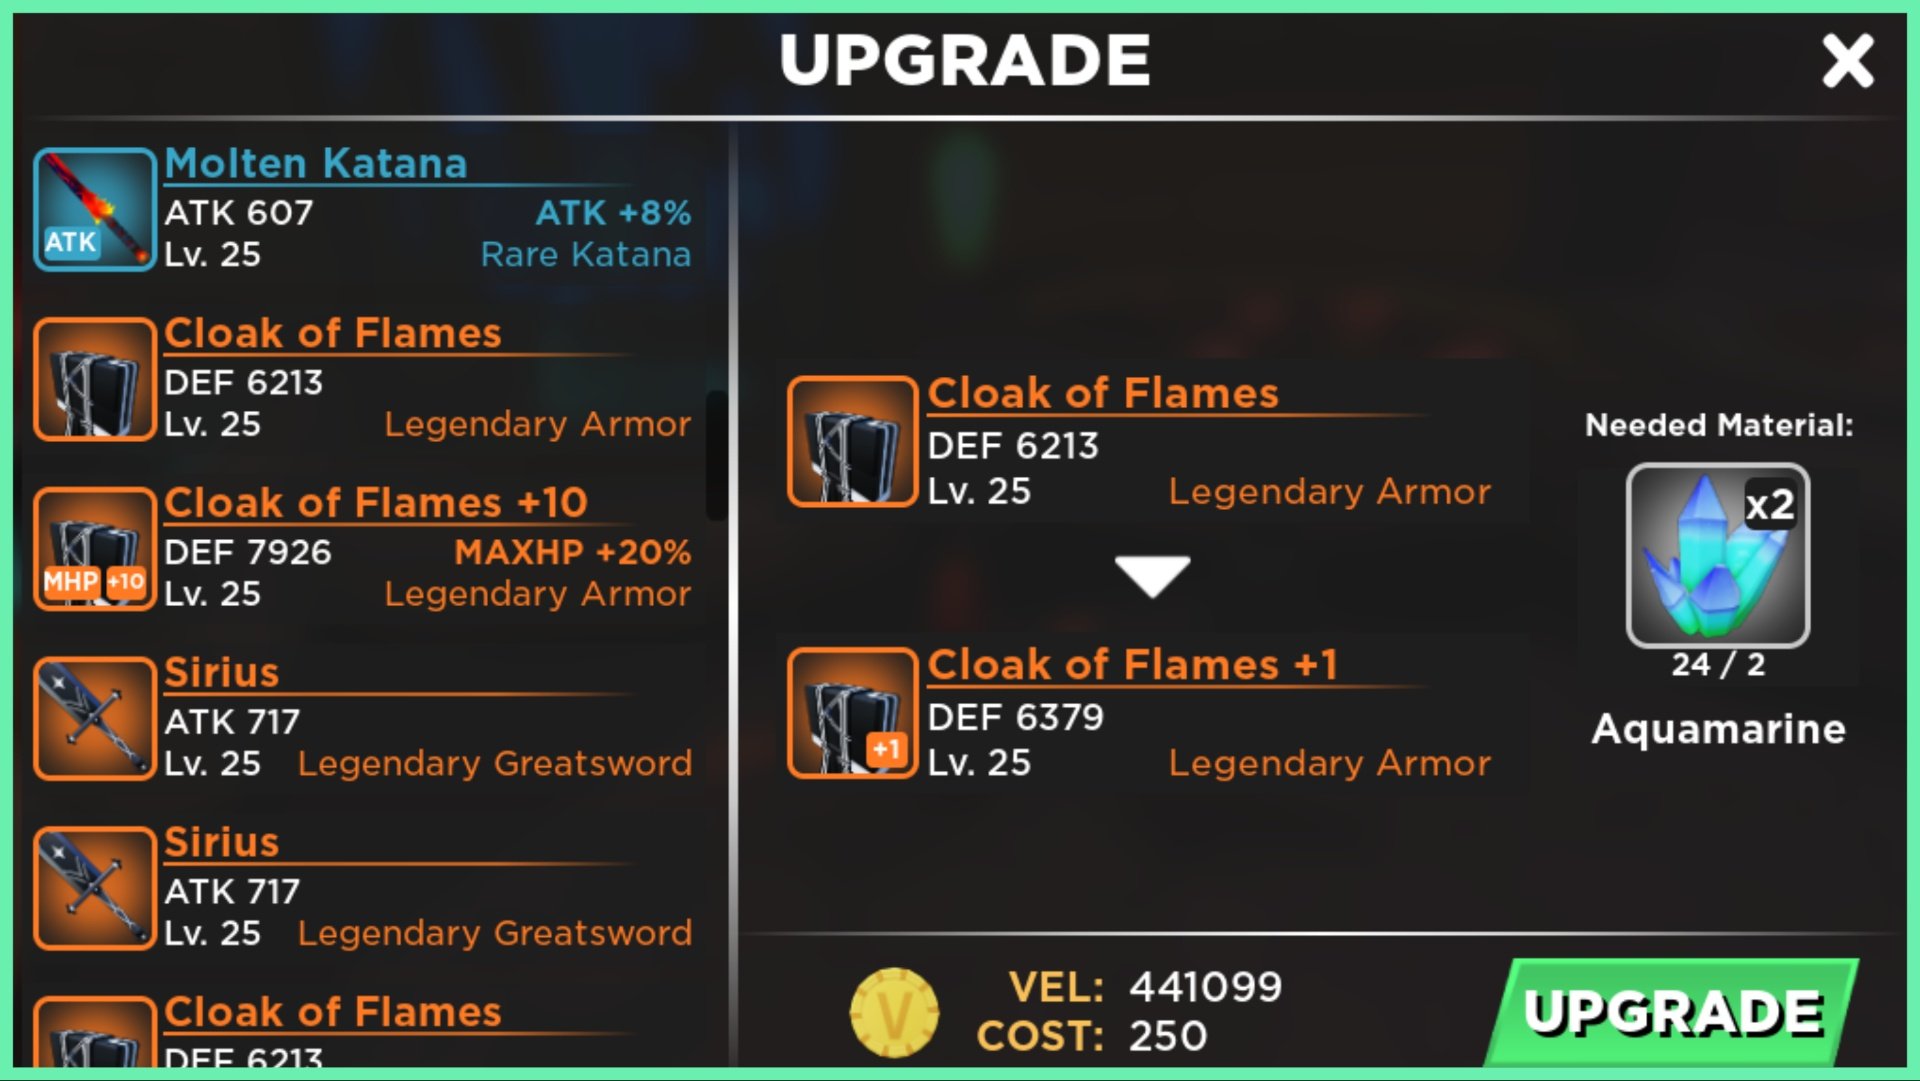 the image shows one of the upgrade pages showing different equipment on the left and then the ore requirements to improve the selected kit